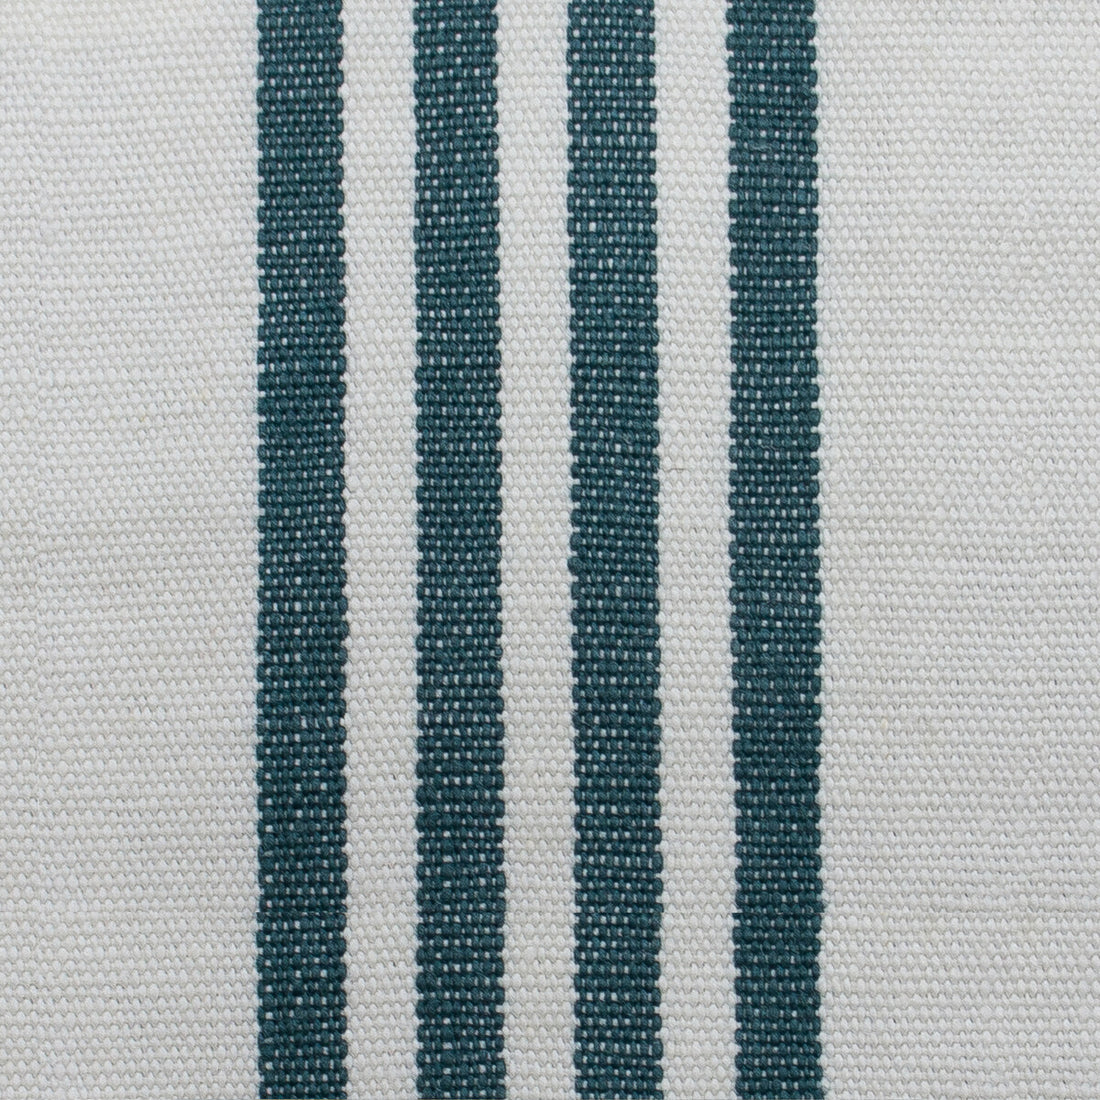 Miami fabric in verde color - pattern GDT5560.002.0 - by Gaston y Daniela in the Gaston Luis Bustamante collection